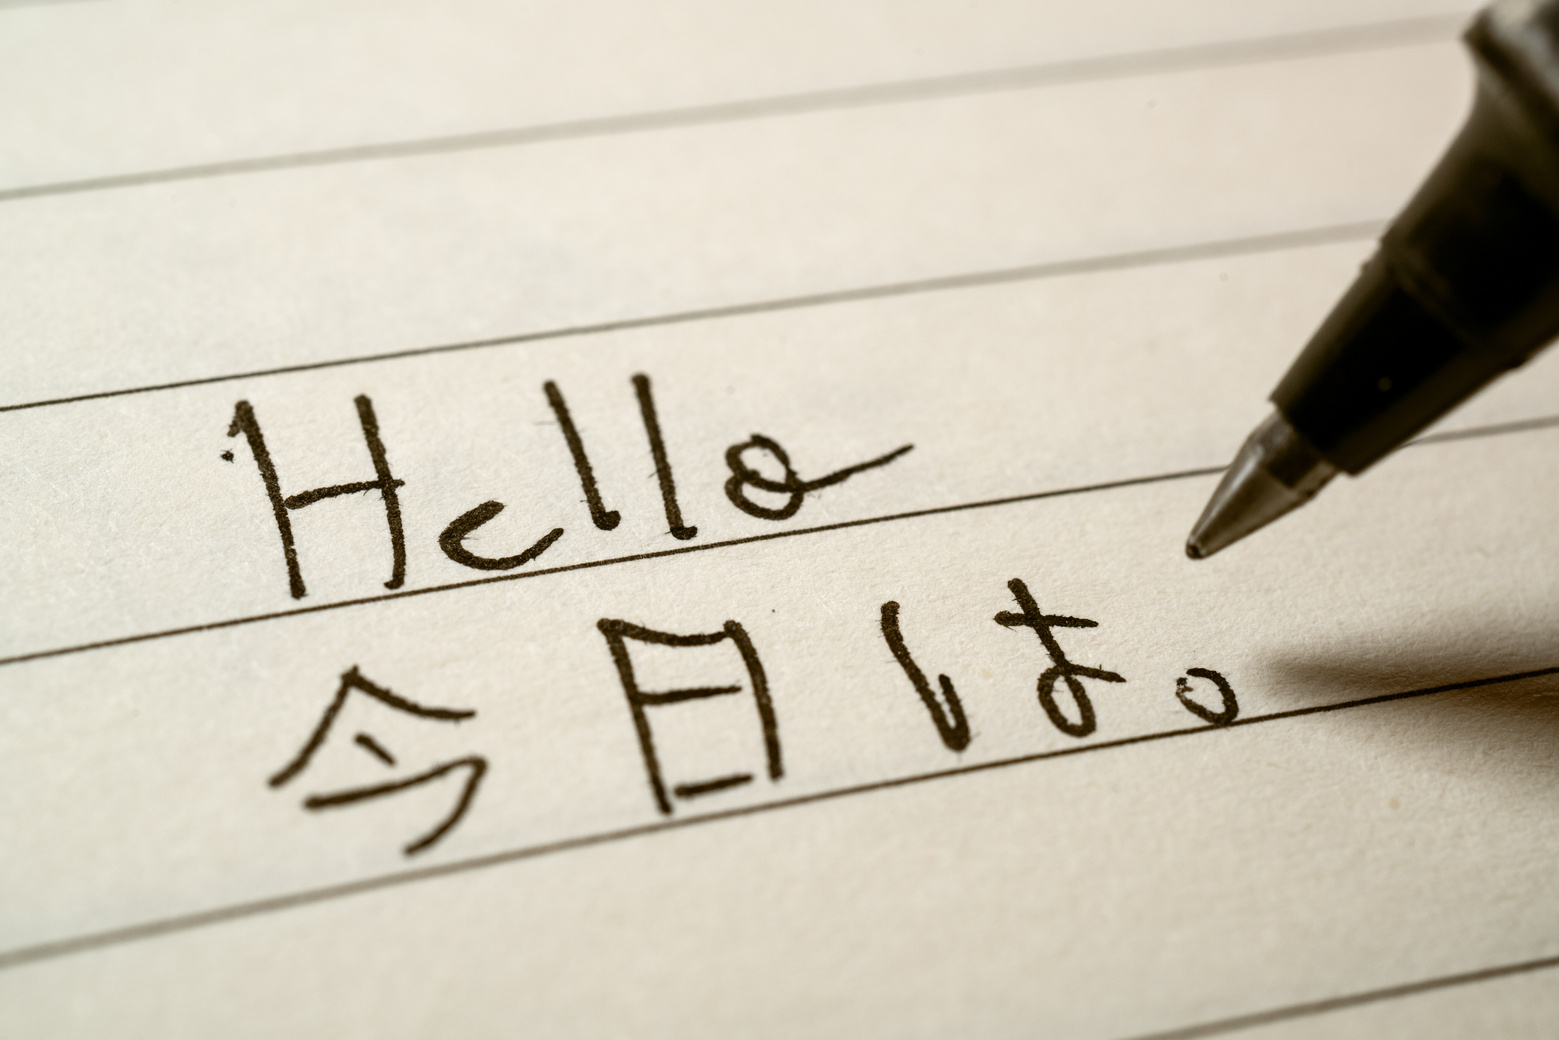 Beginner Japanese language learner writing Hello word in Japanese kanji characters on a notebook close-up shot